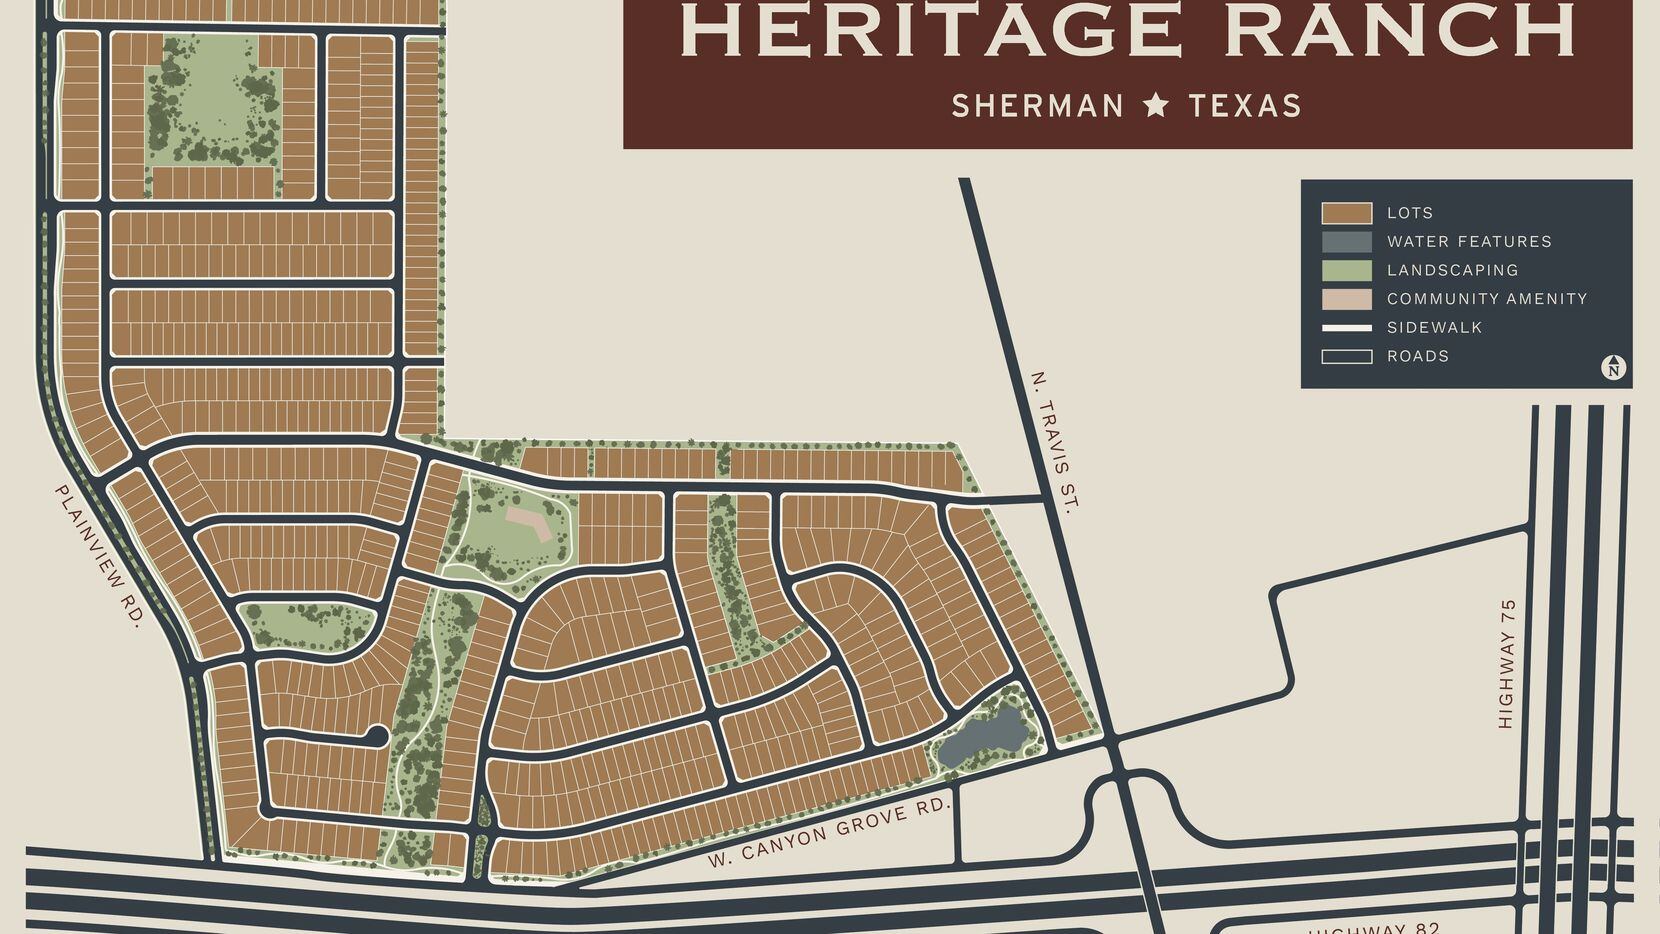 Covenant Development is planning 750 single-family homes in Heritage Ranch, a 440-acre...